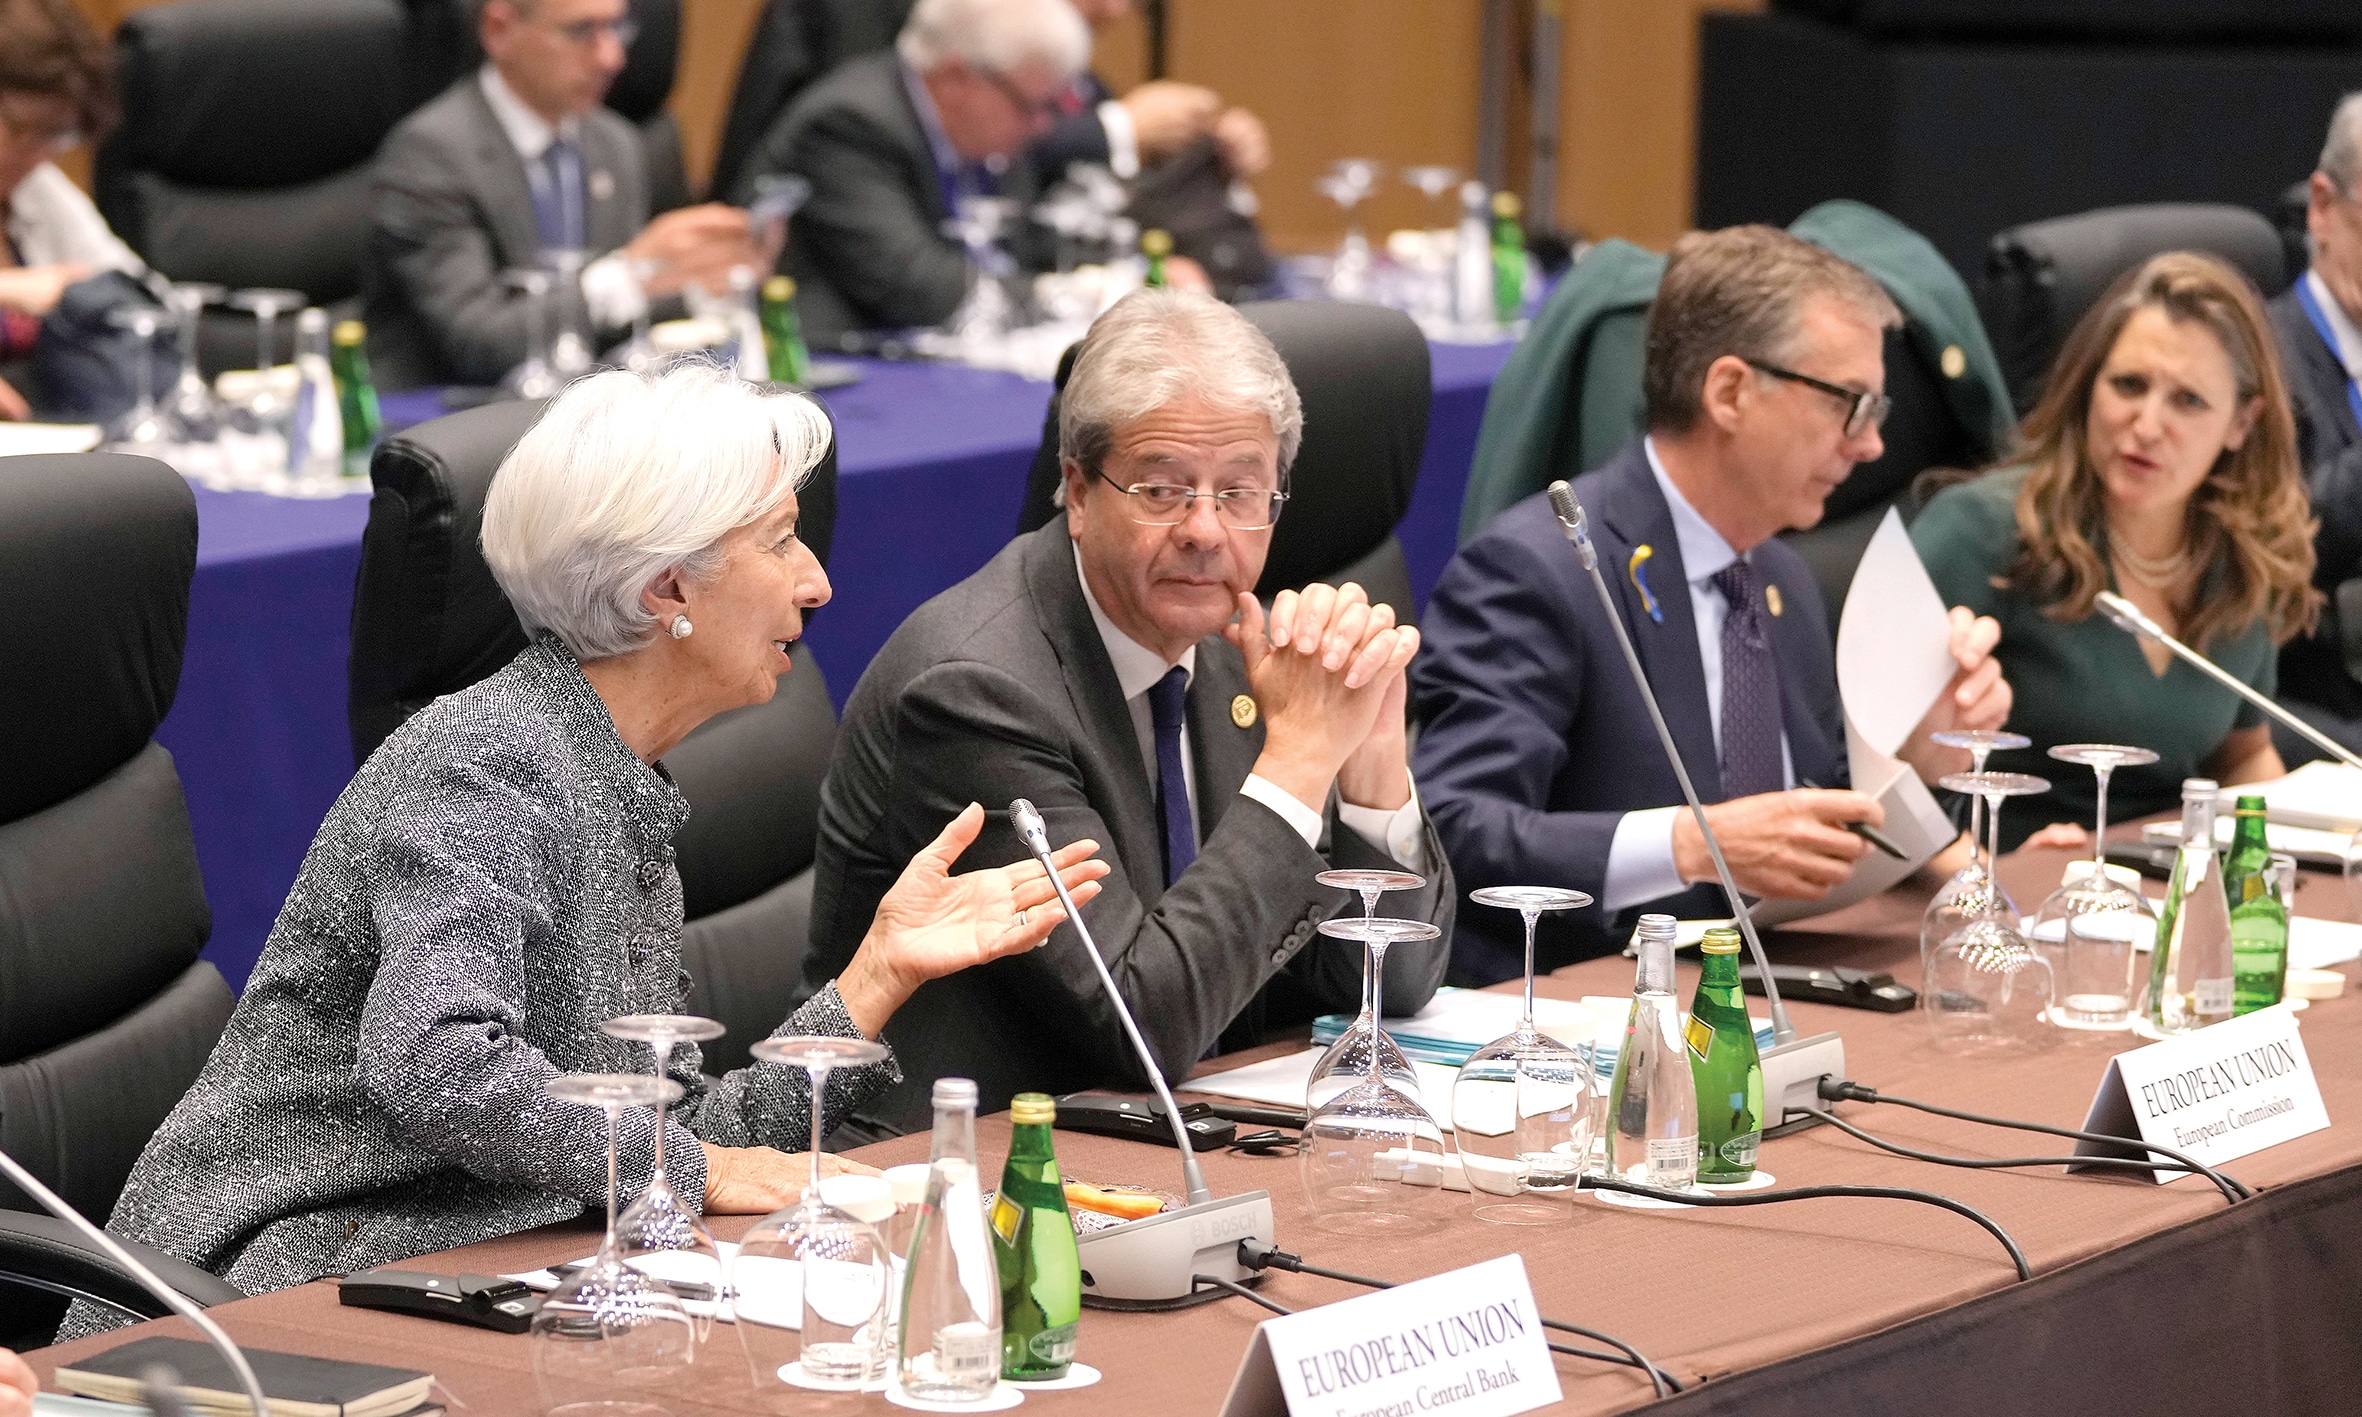 NIIGATA: President of the European Central Bank Christine Lagarde (L) talks with Commissioner for the Economy of the European Commission Paolo Gentiloni (2-L) before the start of the G7 Finance Ministers and Central Bank Governors Meeting opening session at the International Conference Room of Toki Messe in Niigata. – AFPnnnNIIGATA: President of the European Central Bank Christine Lagarde (L) talks with Commissioner for the Economy of the European Commission Paolo Gentiloni (2-L) before the start of the G7 Finance Ministers and Central Bank Governors Meeting opening session at the International Conference Room of Toki Messe in Niigata. – AFP